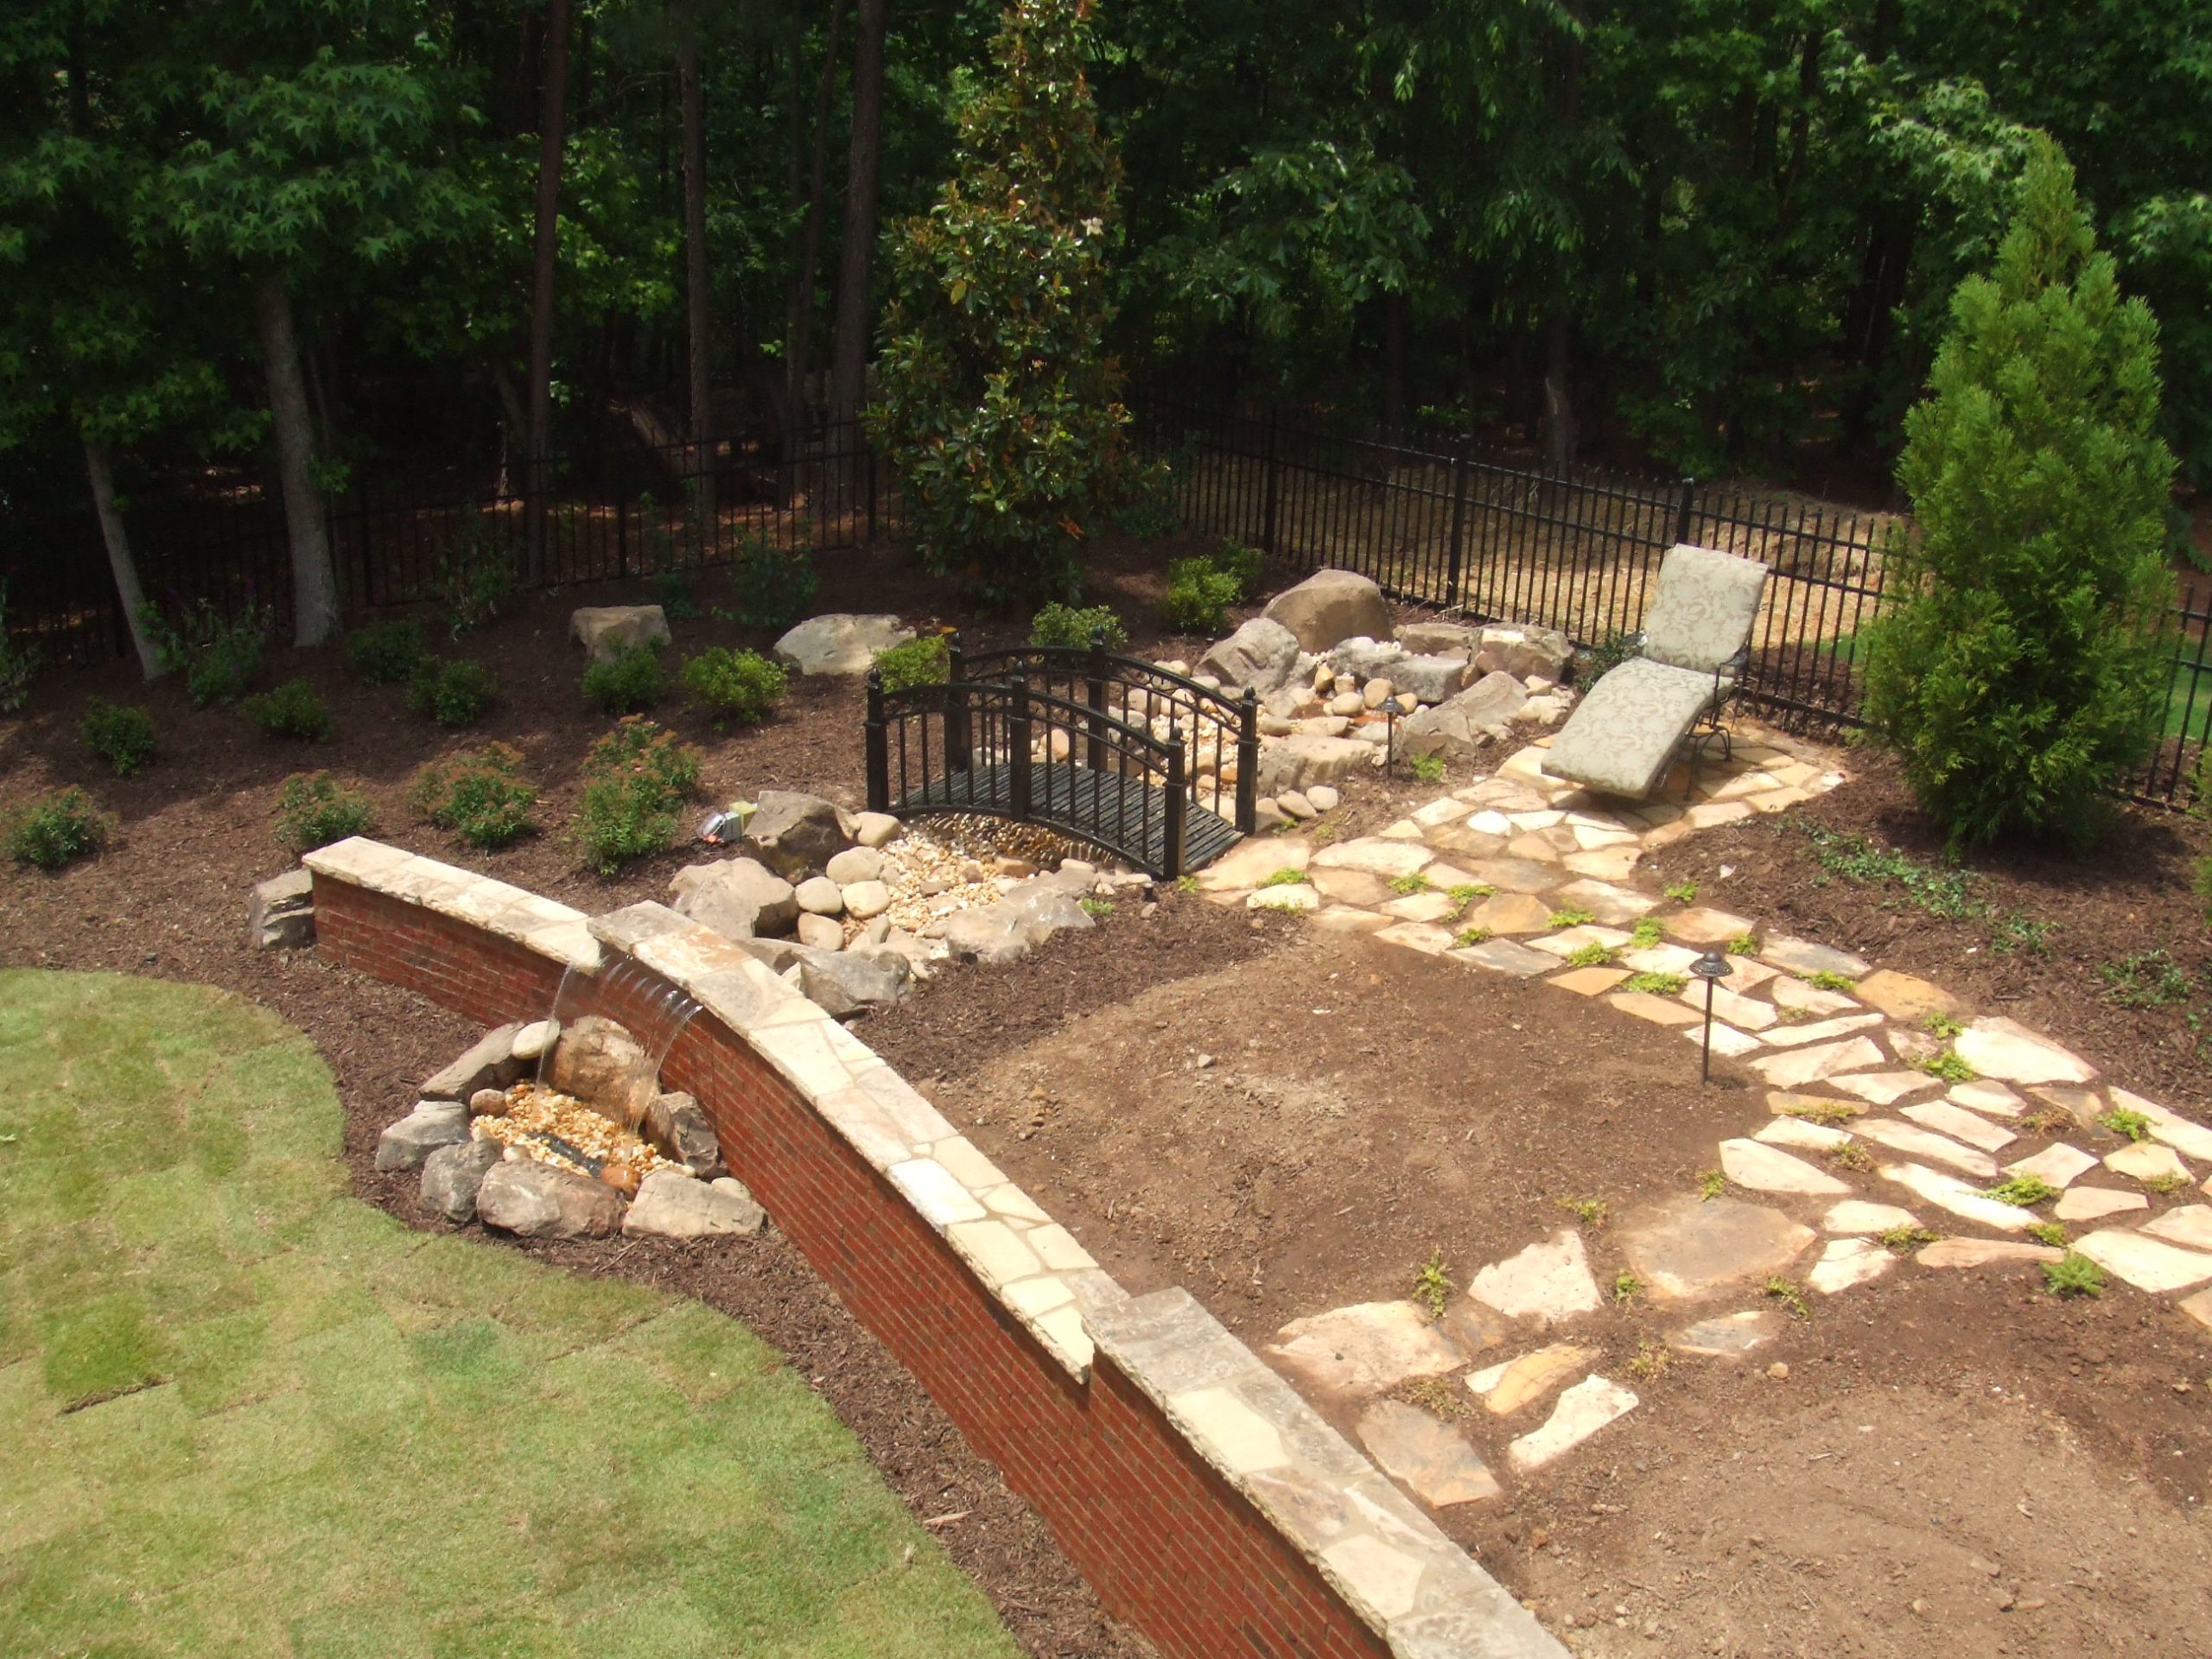 Landscaping with Walkways, a Bridge, and Water Feature by Sugar Hill Outdoors